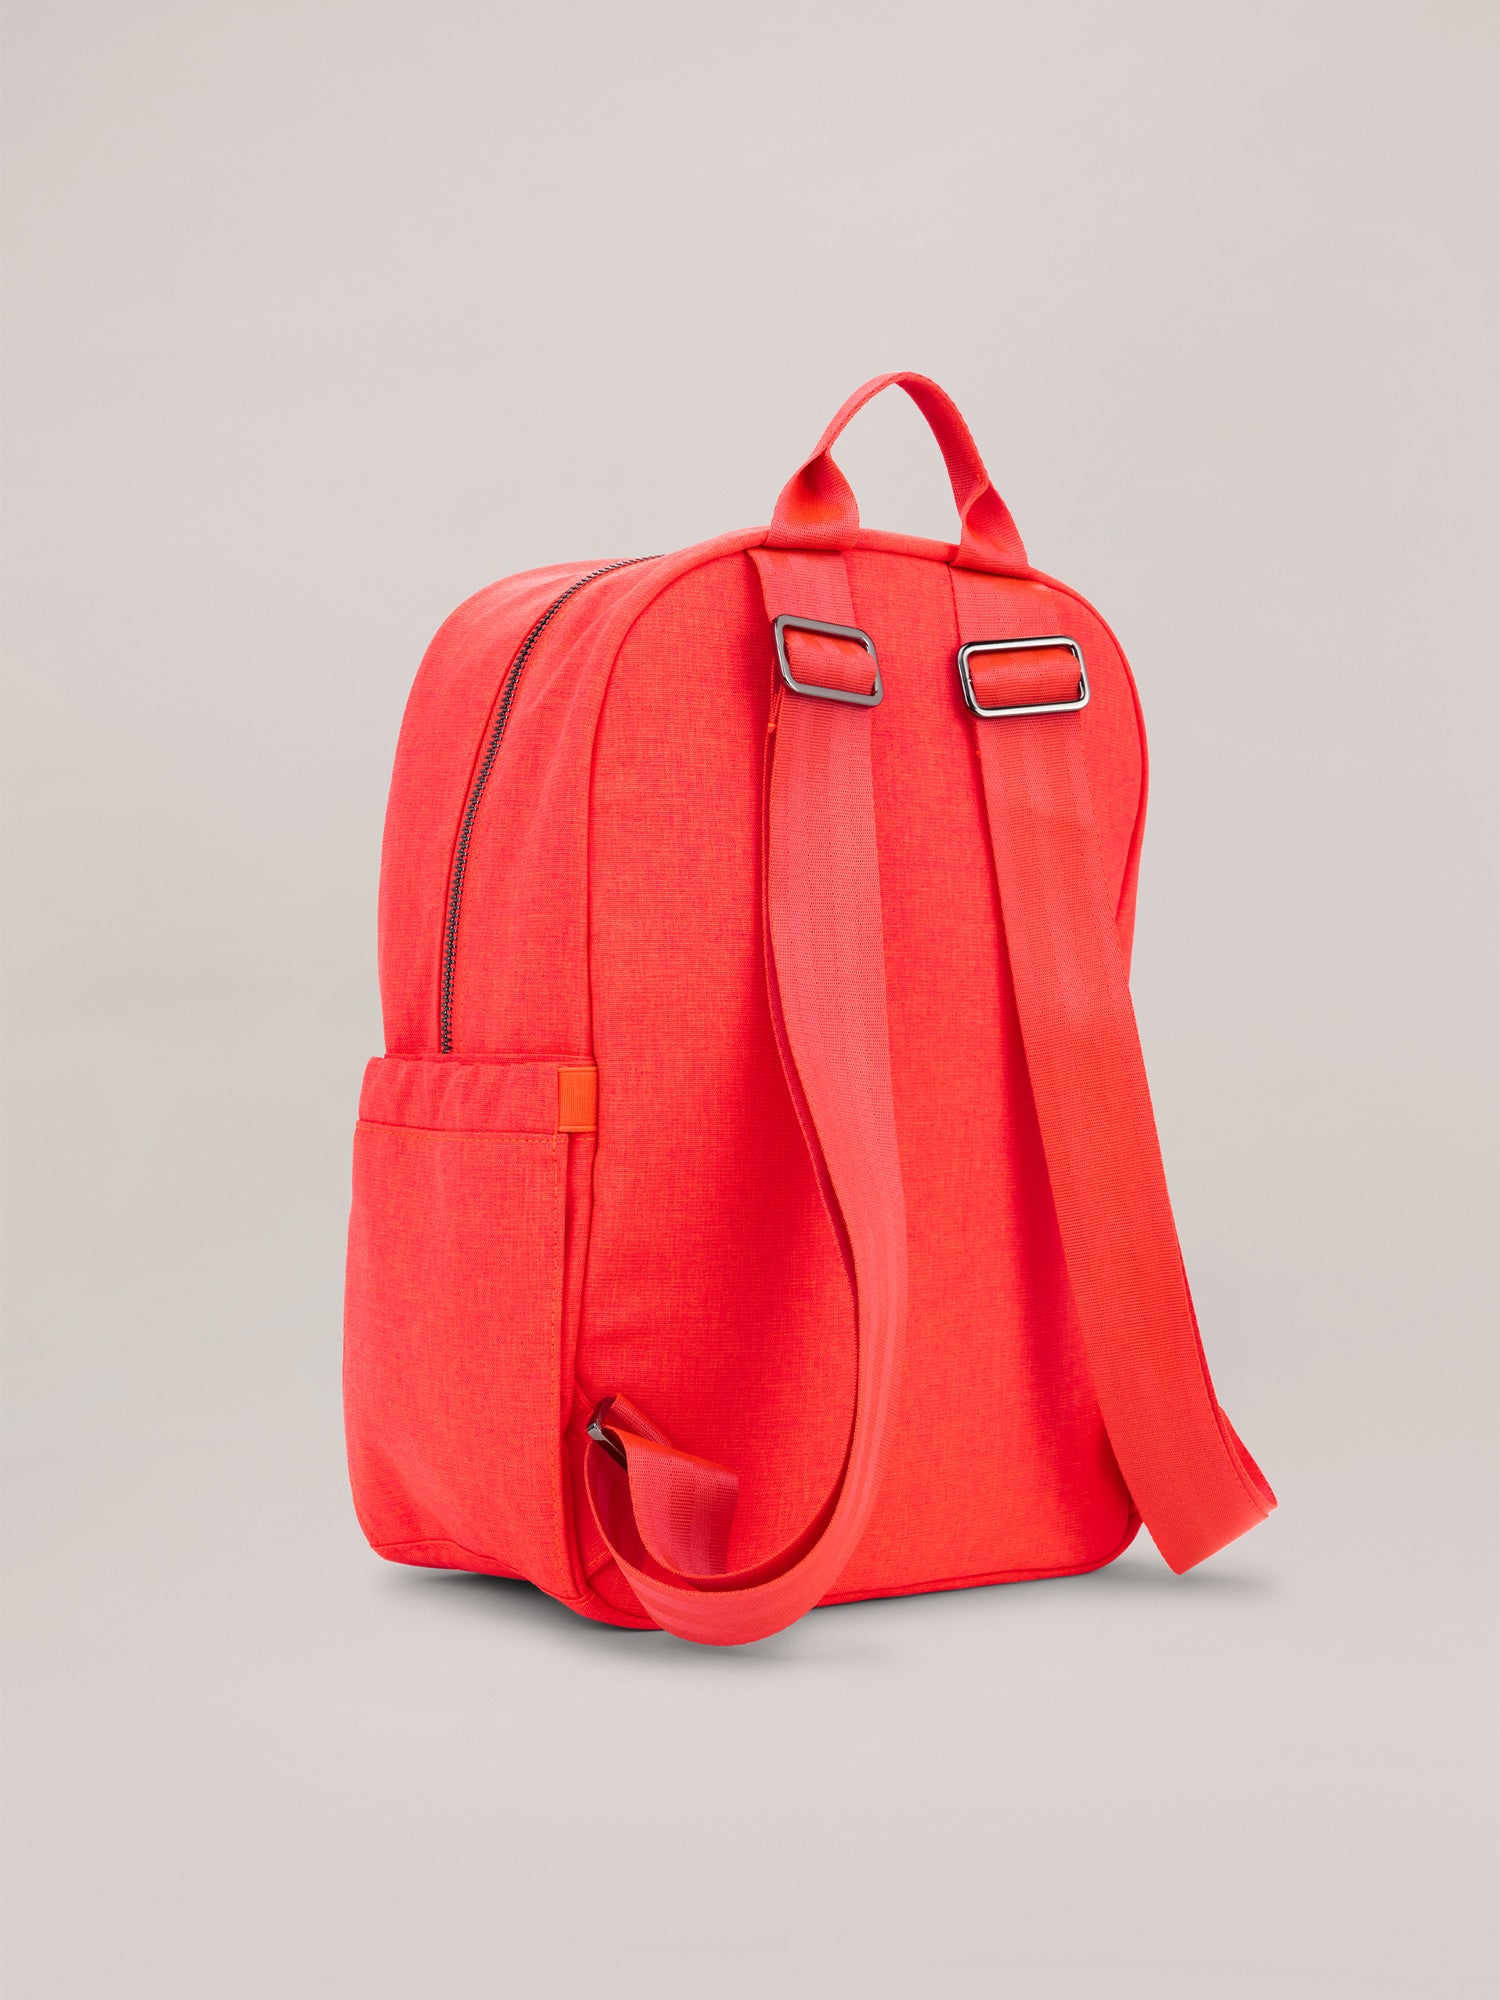 Neon Coral Pink Midi Backpack Quarter Angle Back View